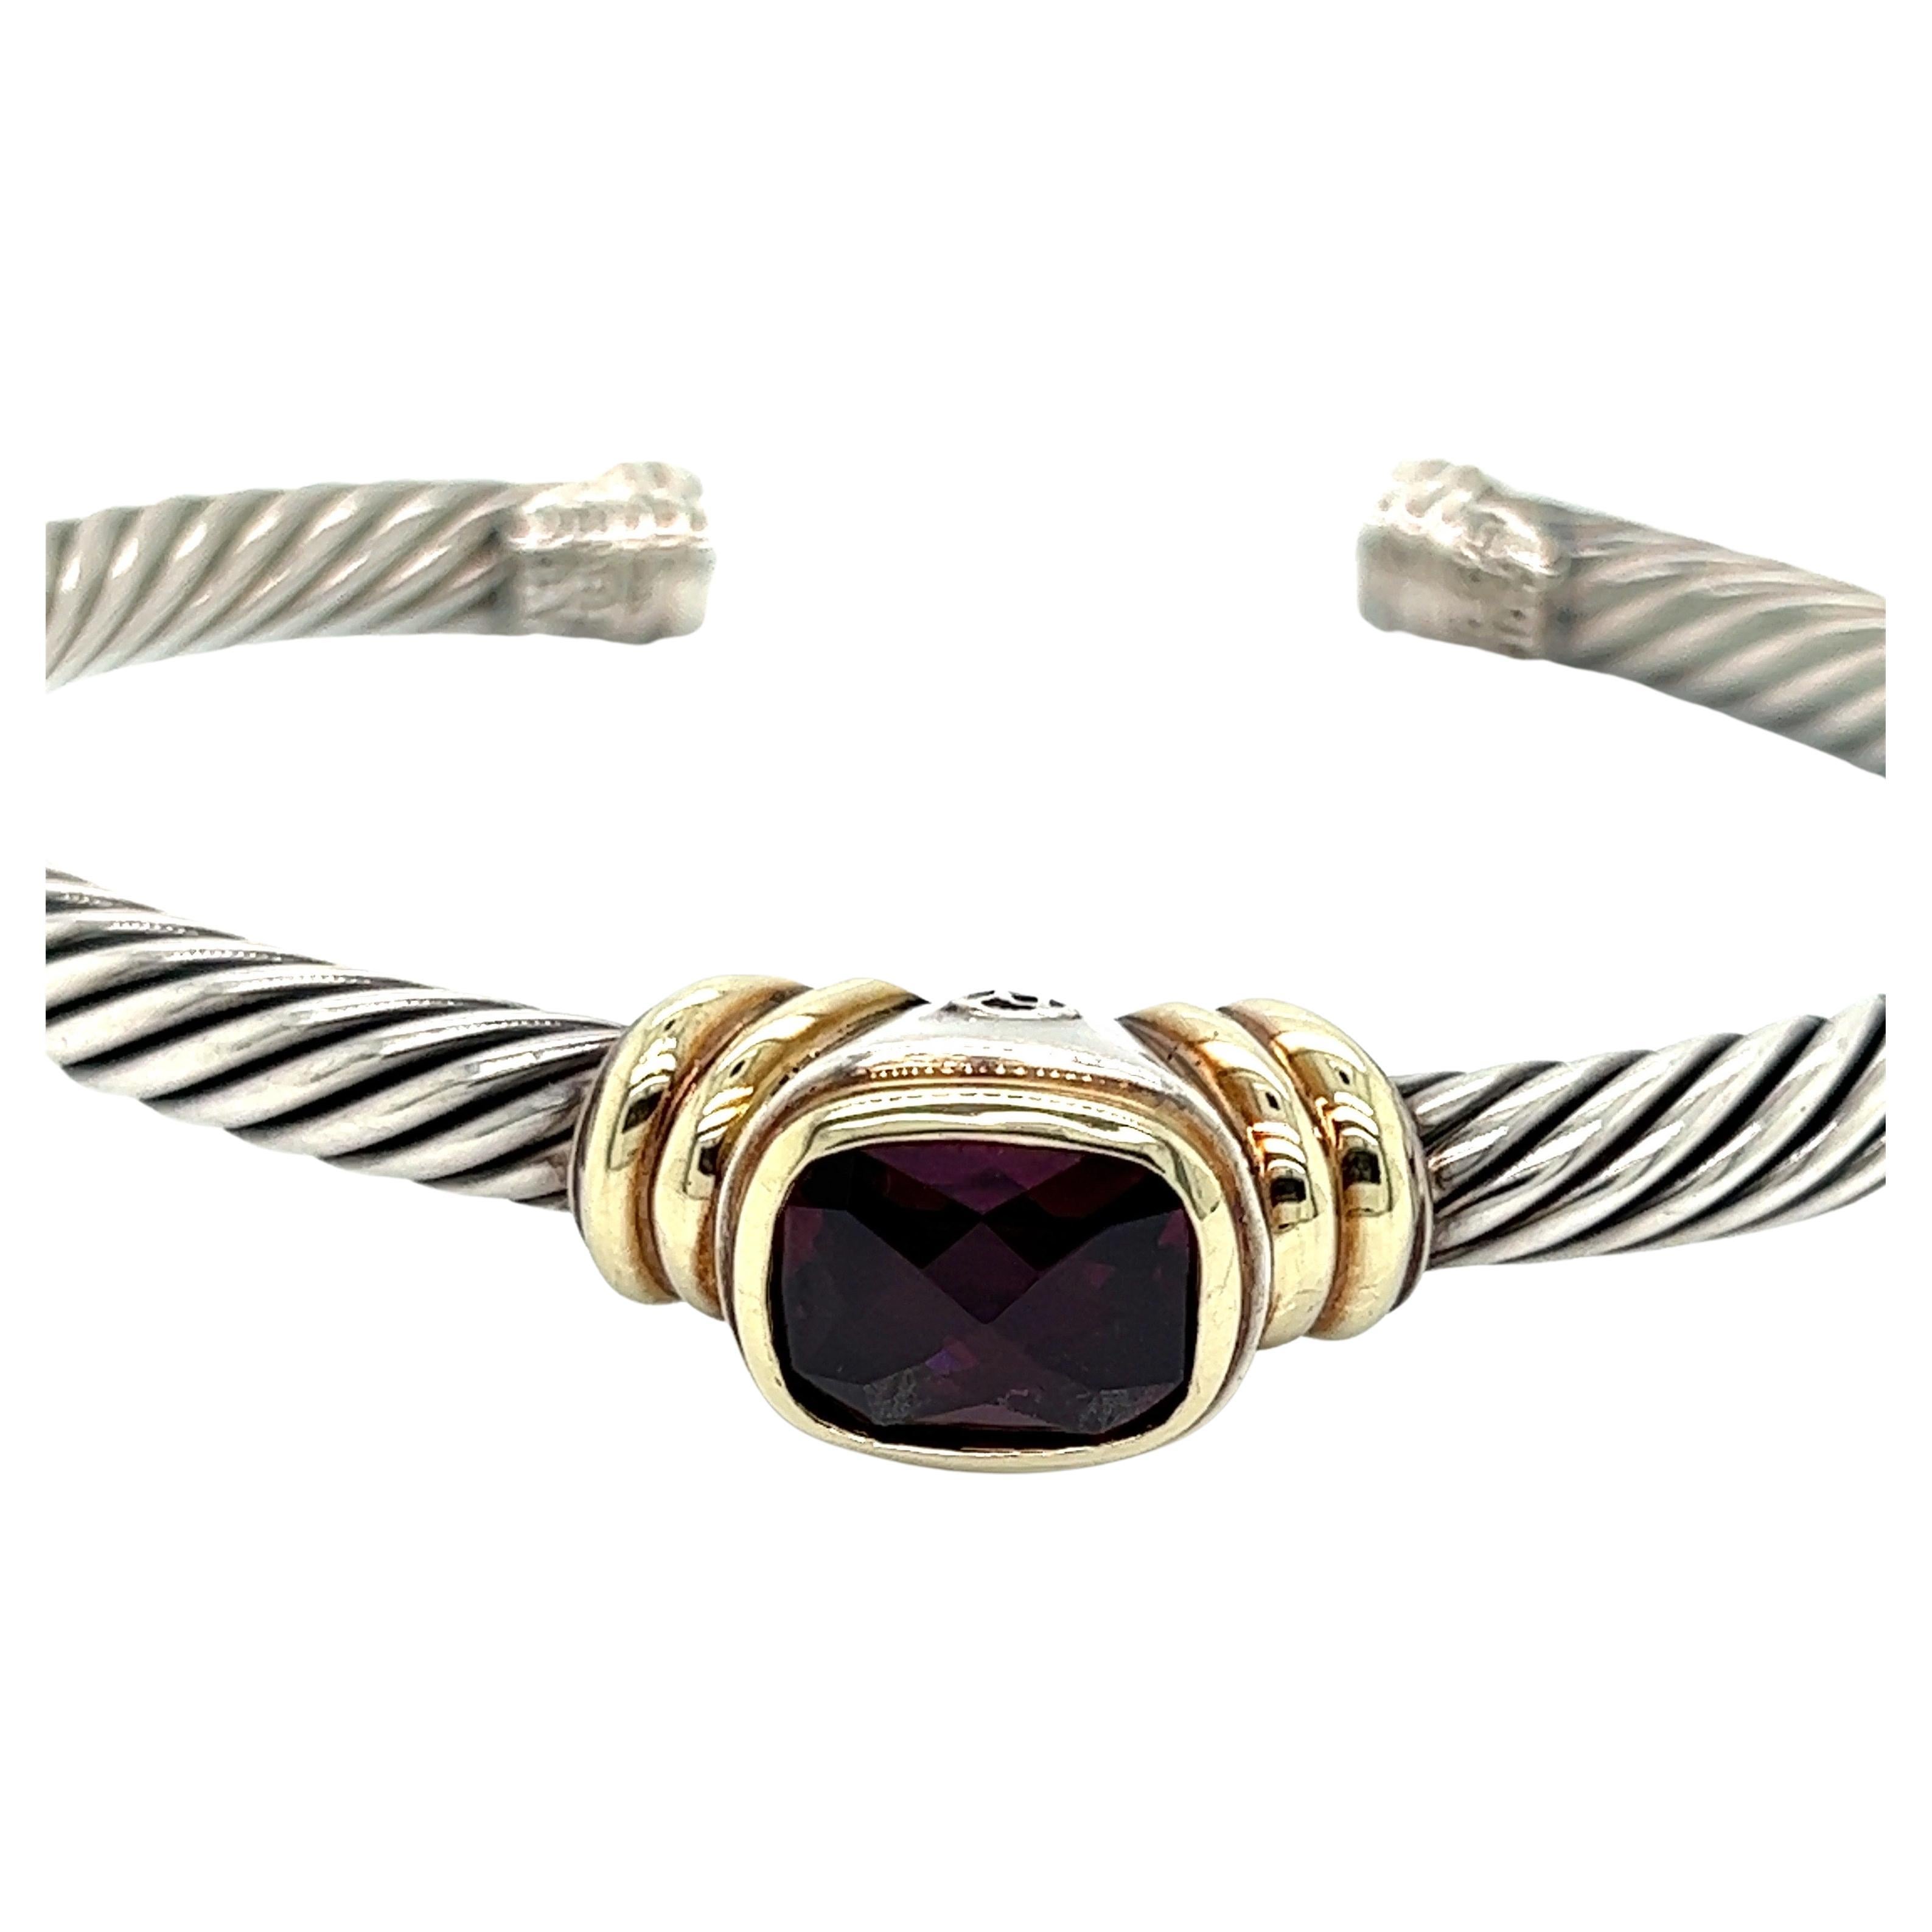 David Yurman's cable bracelet is stunning with the sterling silver perfectly complementing the rhodolite garnet that is cradled in yellow gold. This design has evolved over the years into the classic piece it is today. 

Additional